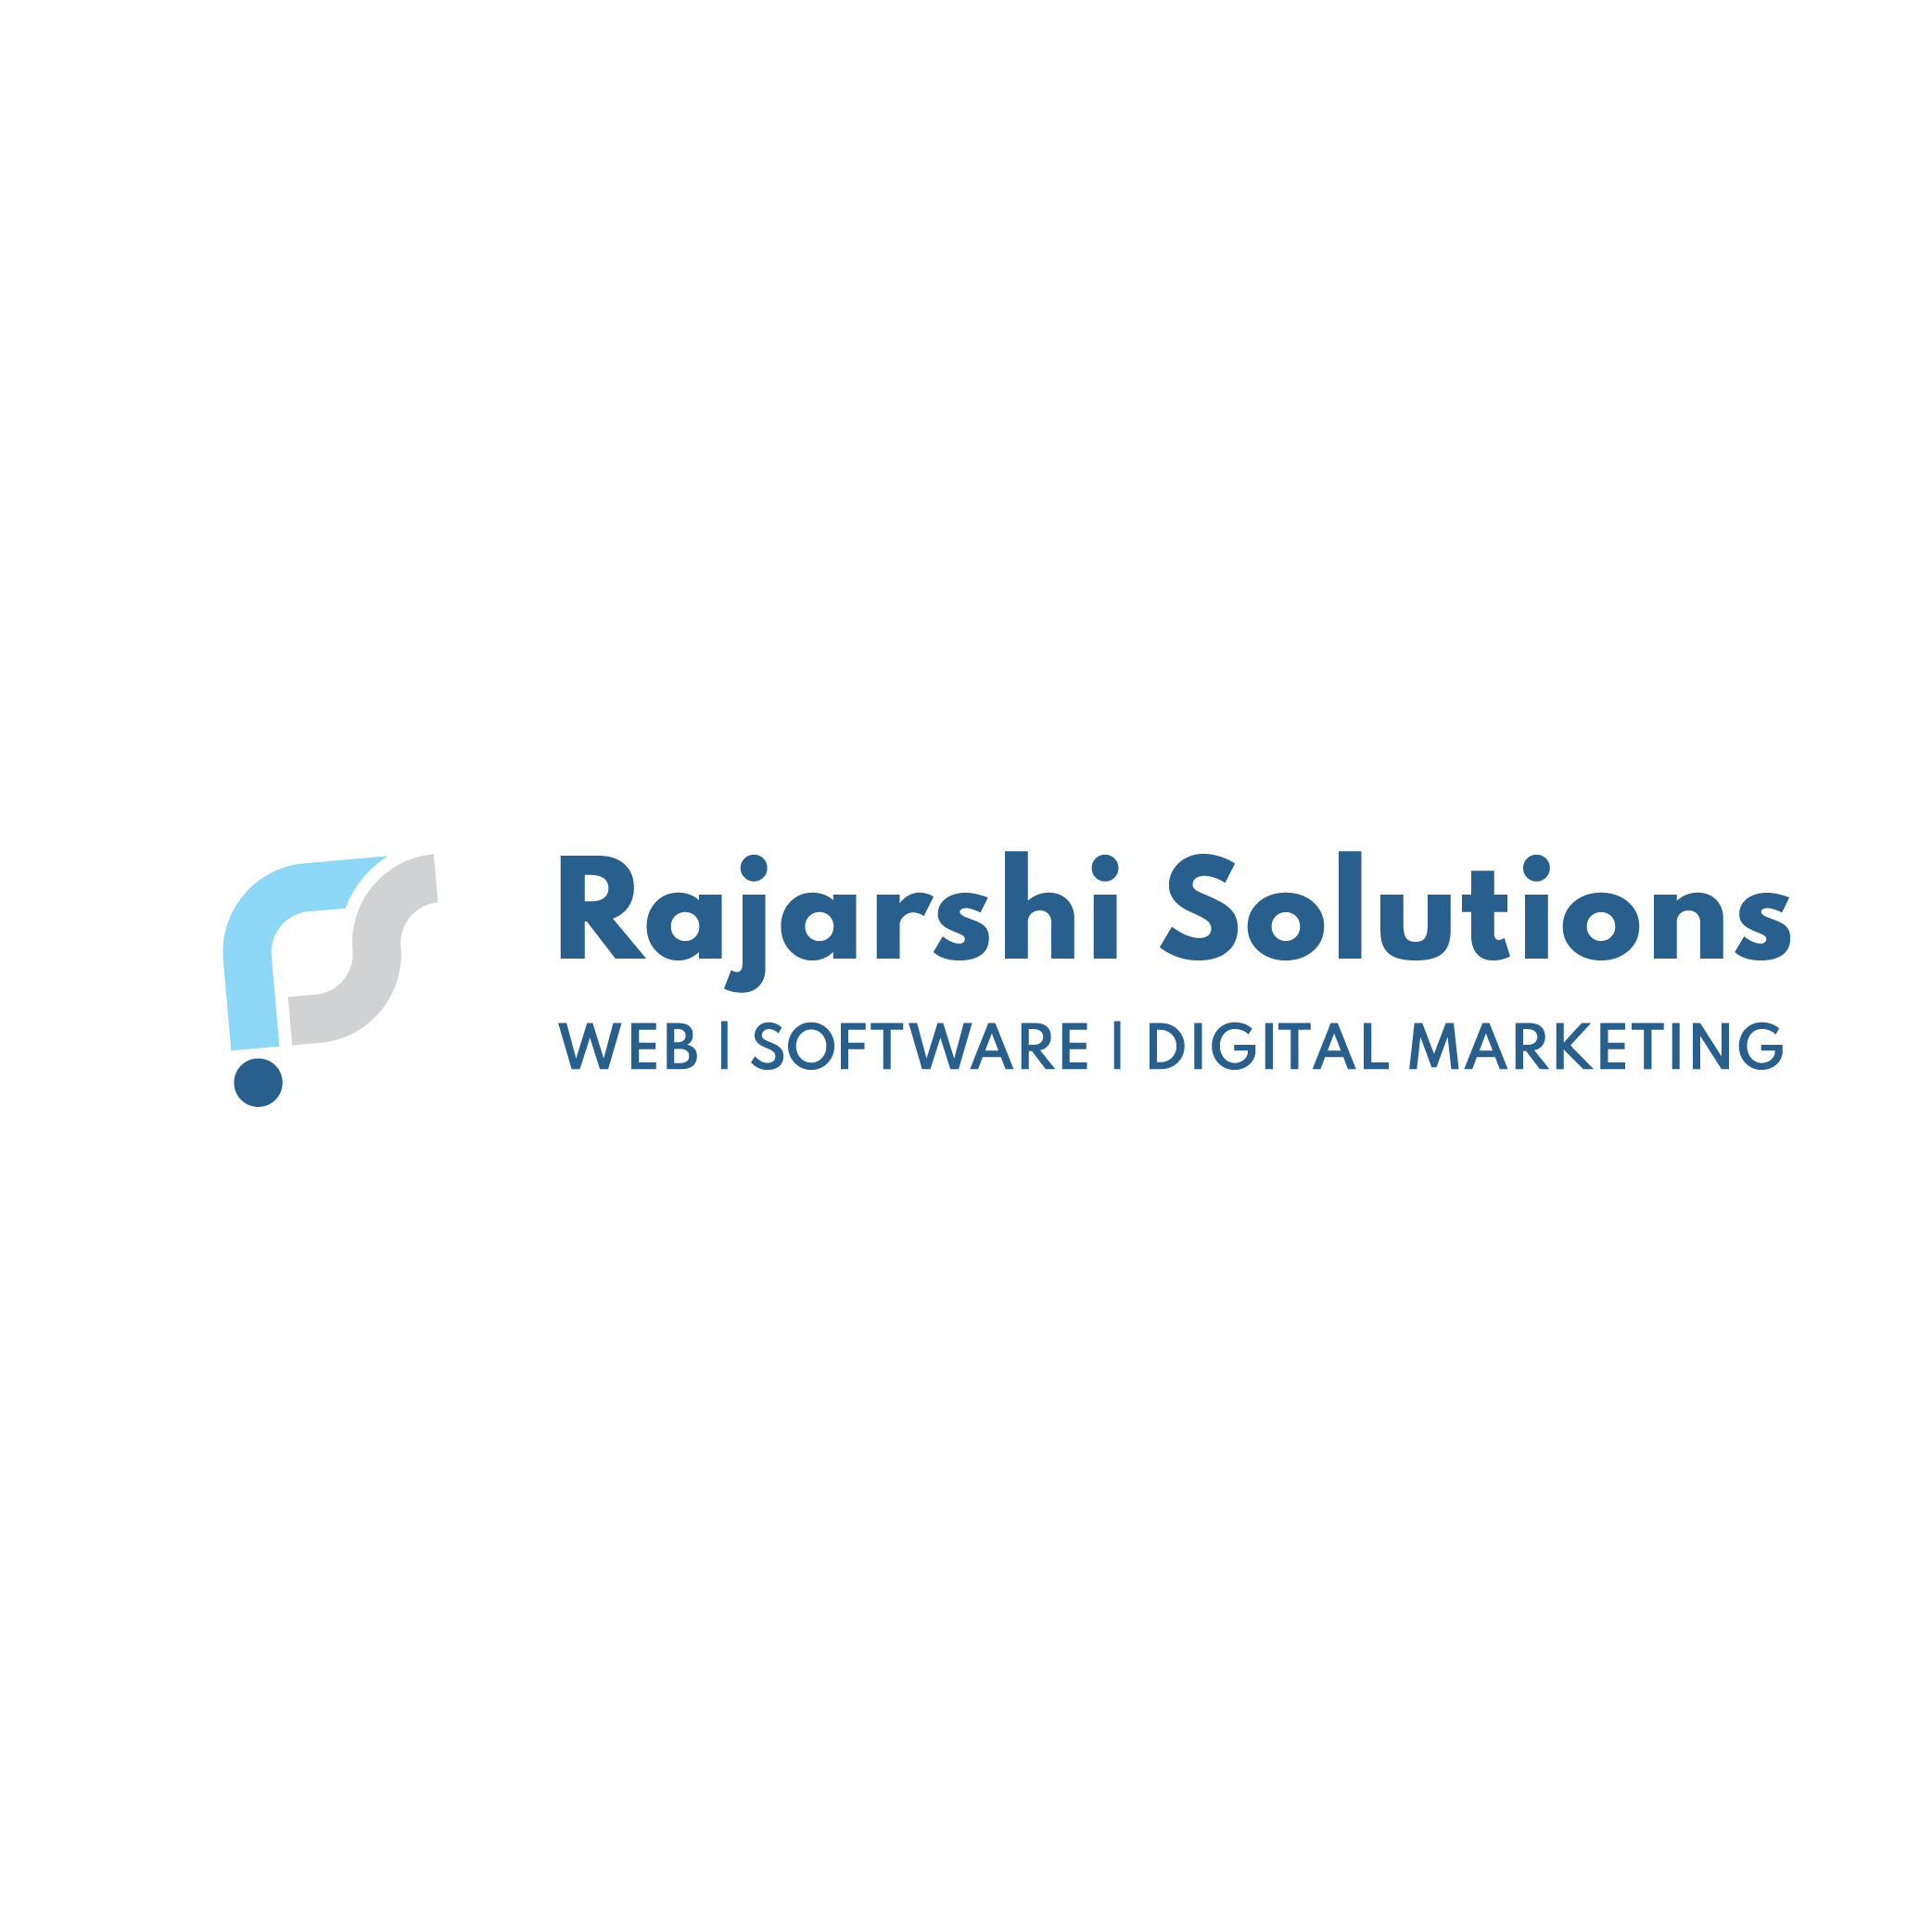 Rajarshi Solutions|Accounting Services|Professional Services